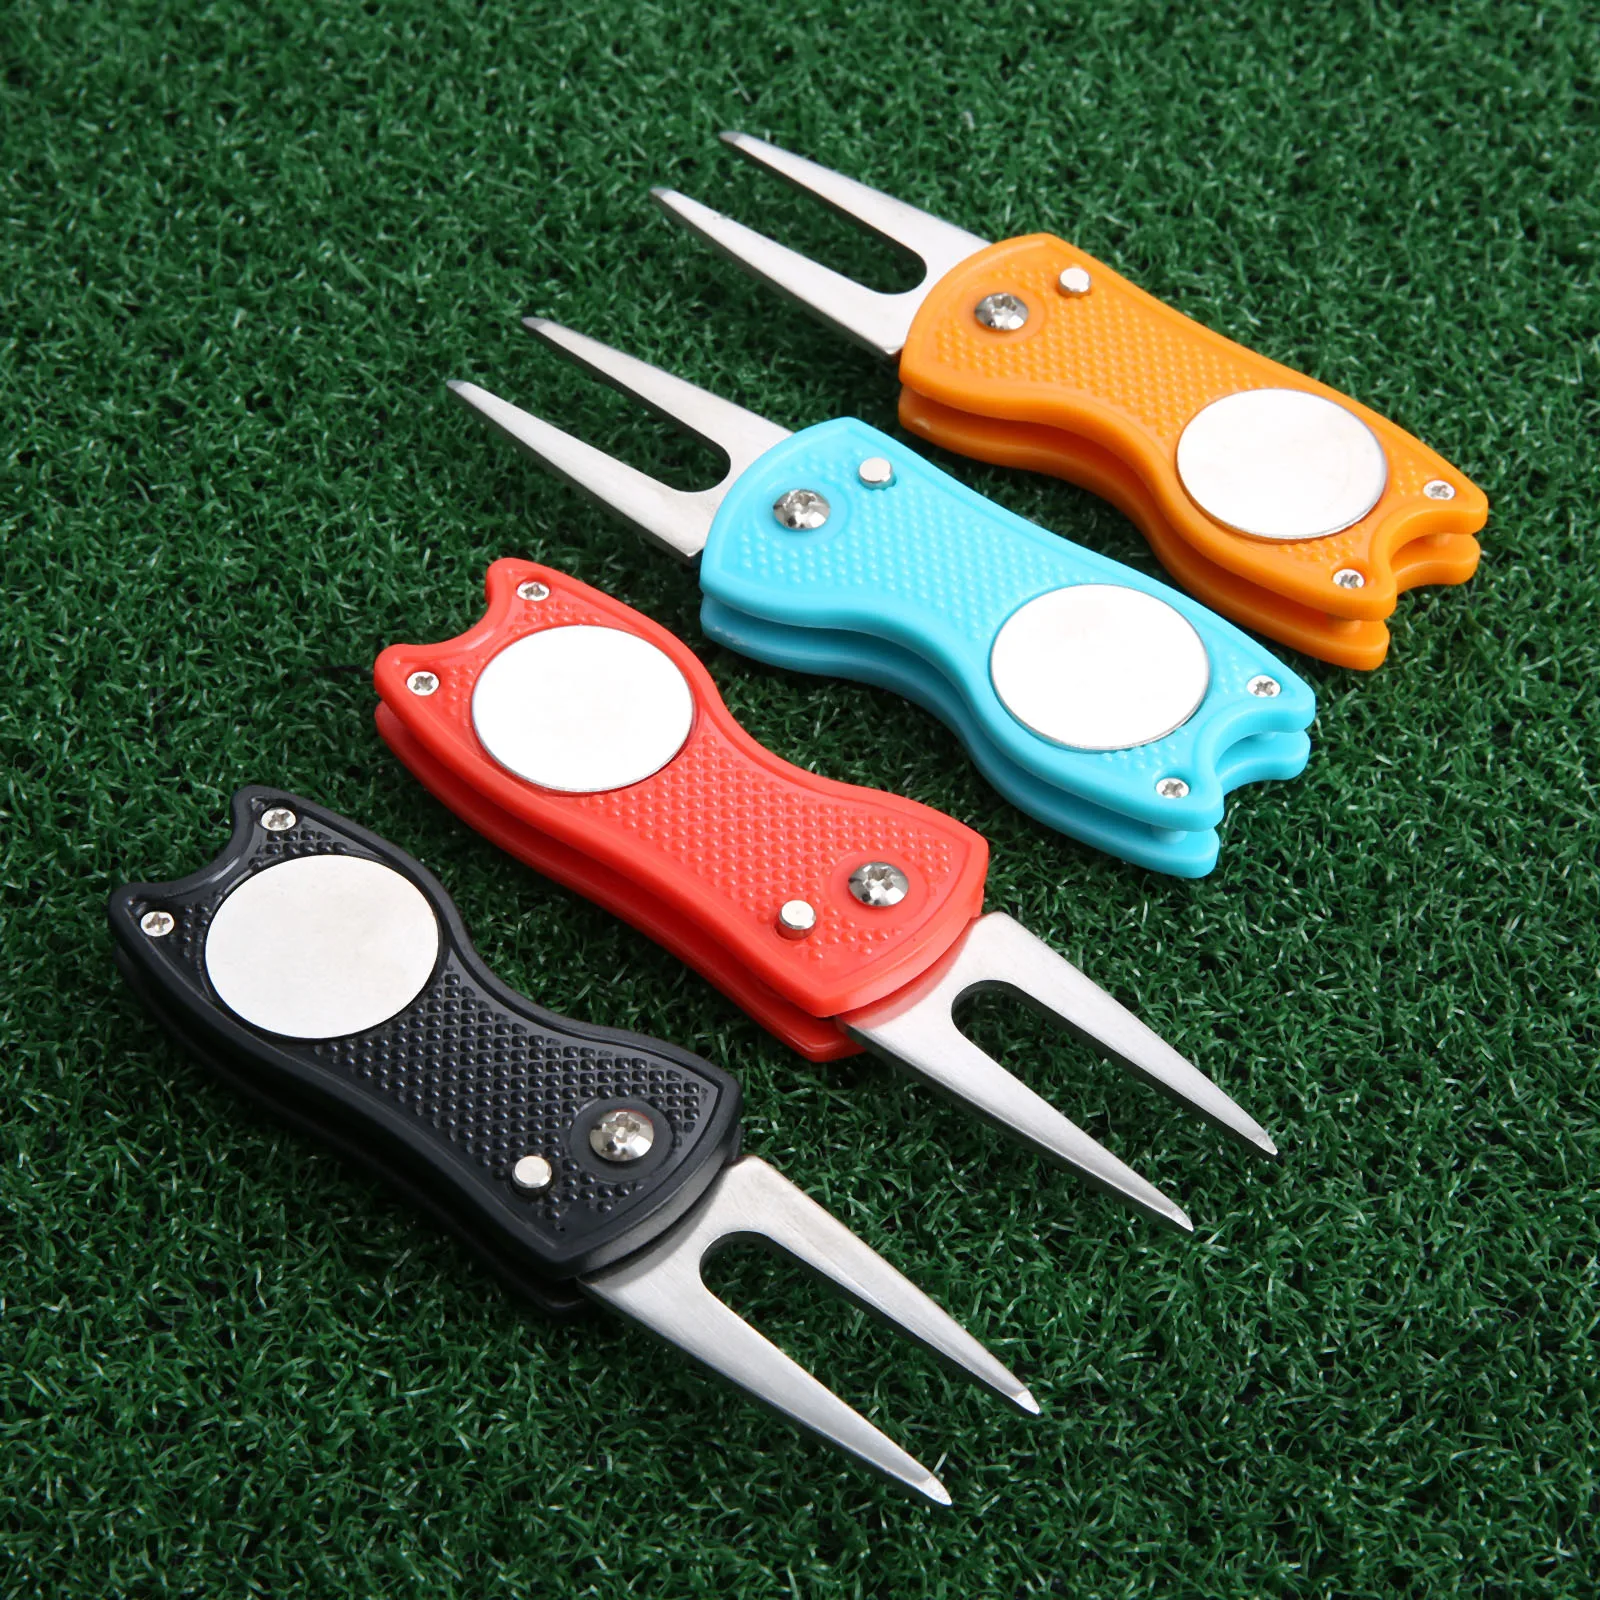 Stainless Steel Golf Putting Green Divot Fork Repair Switchblade Tool With Balls Mark Pitchfork Fit Groove Cleaner & Club Rest